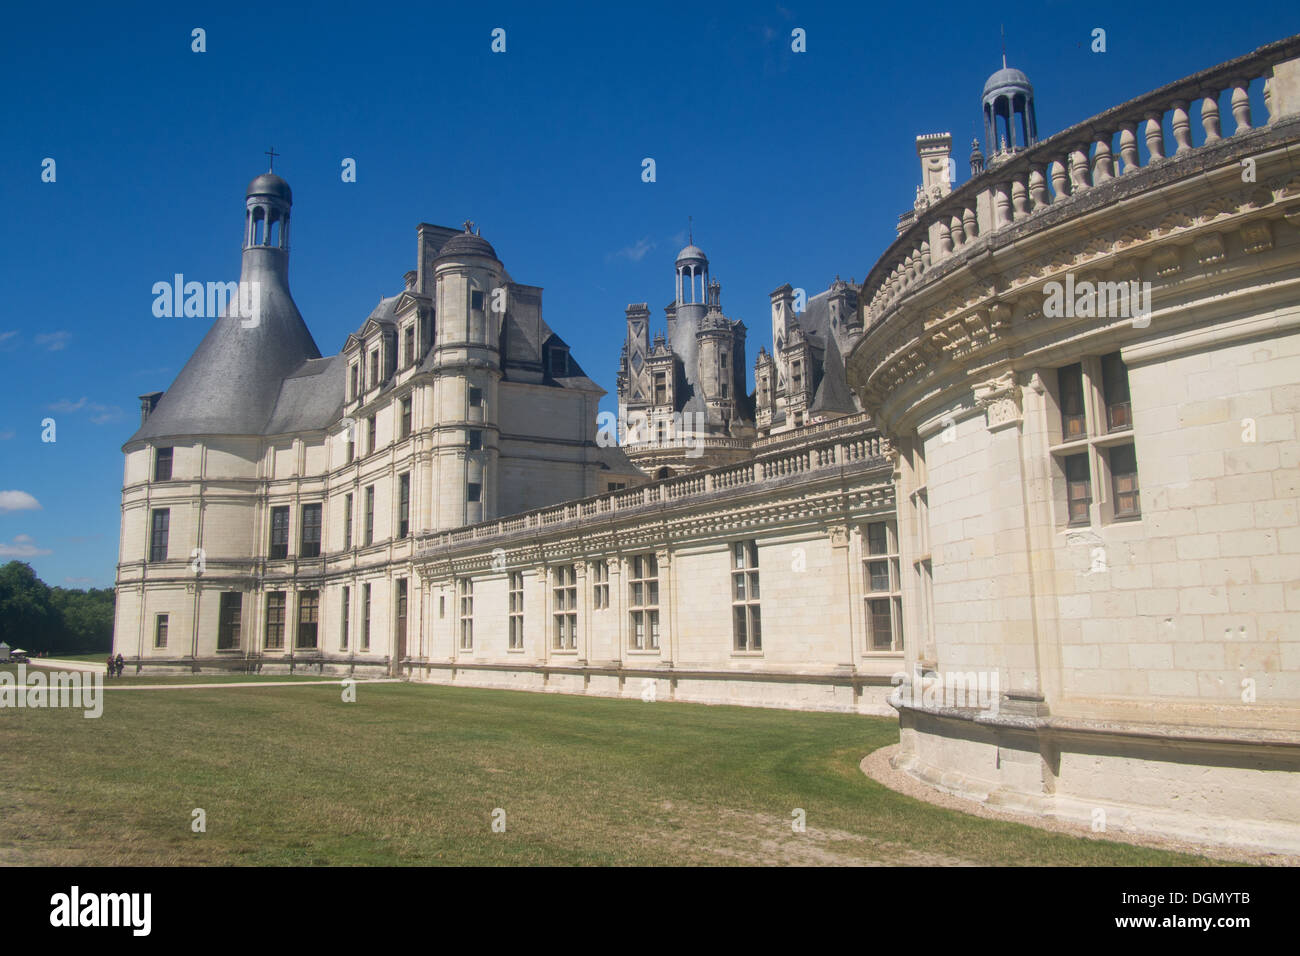 Chateau of Chambord, Loire Valley ('Garden of France'), France. Stock Photo